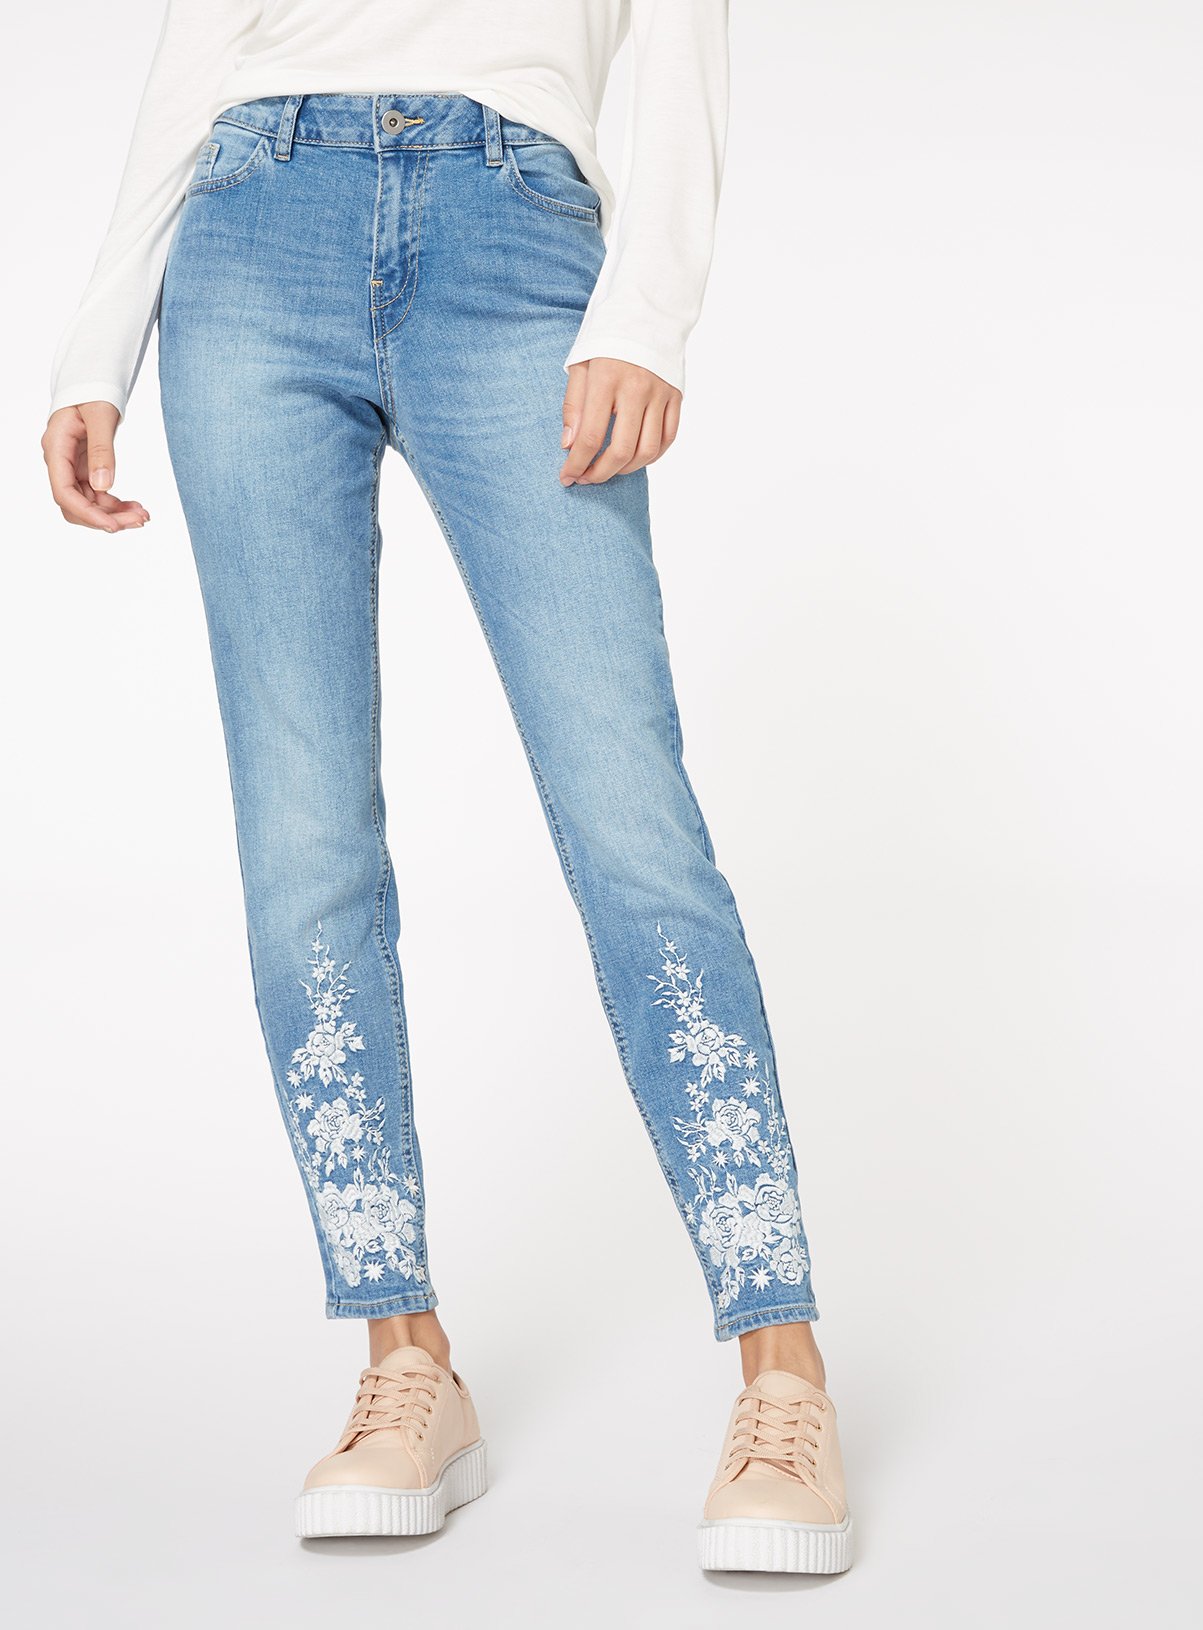 embroidered skinny jeans